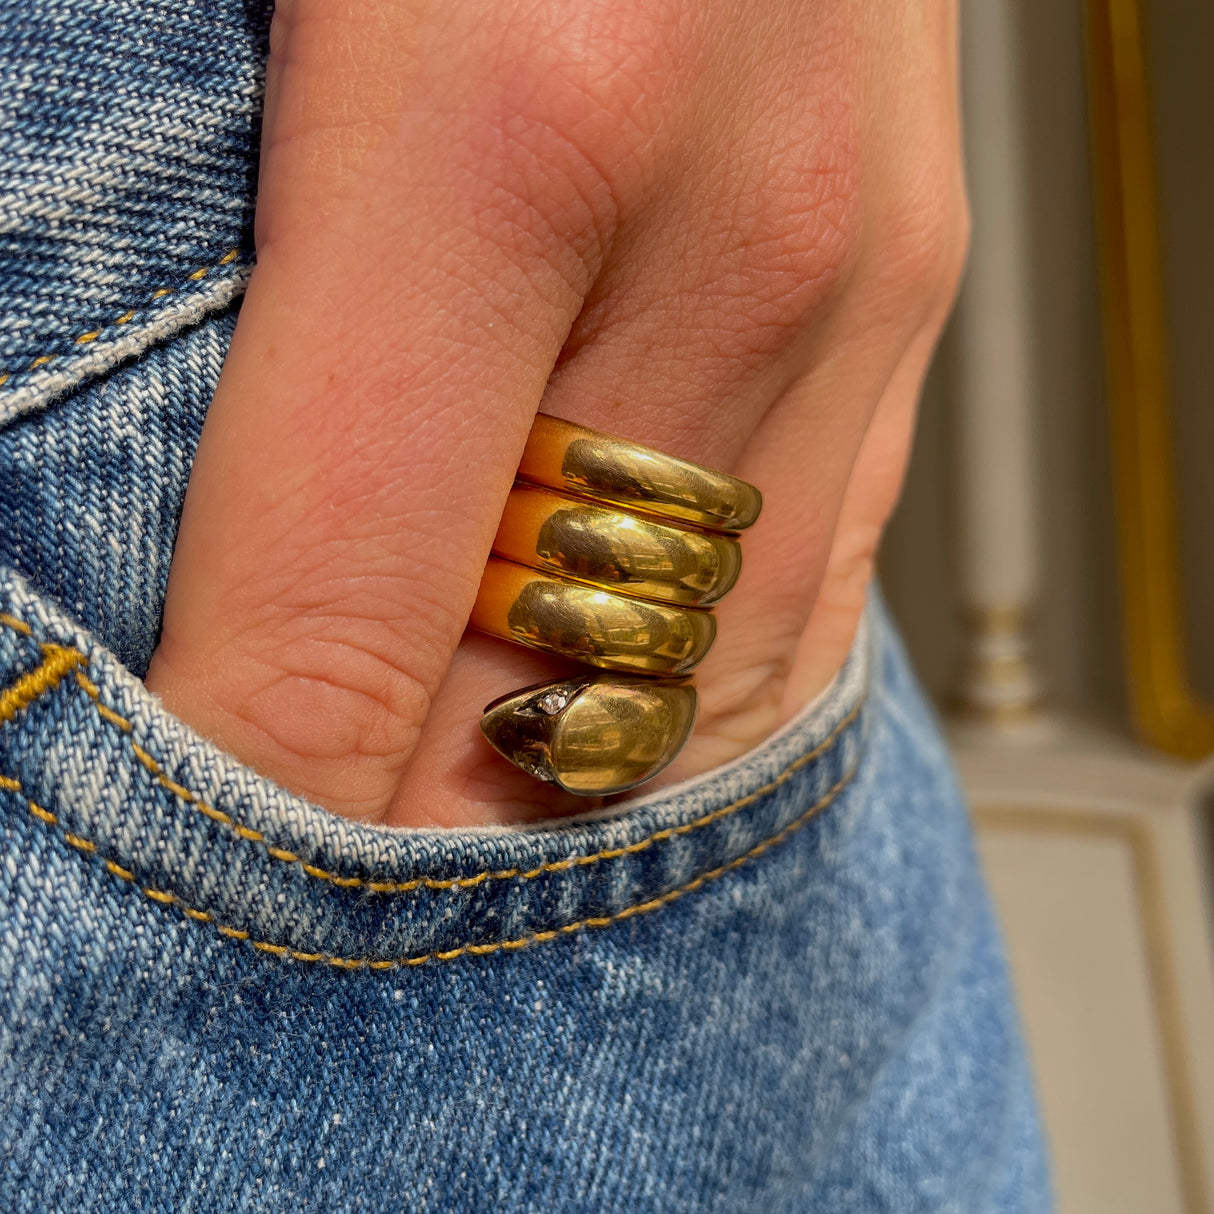 Victorian yellow gold snake ring, worn on hand.